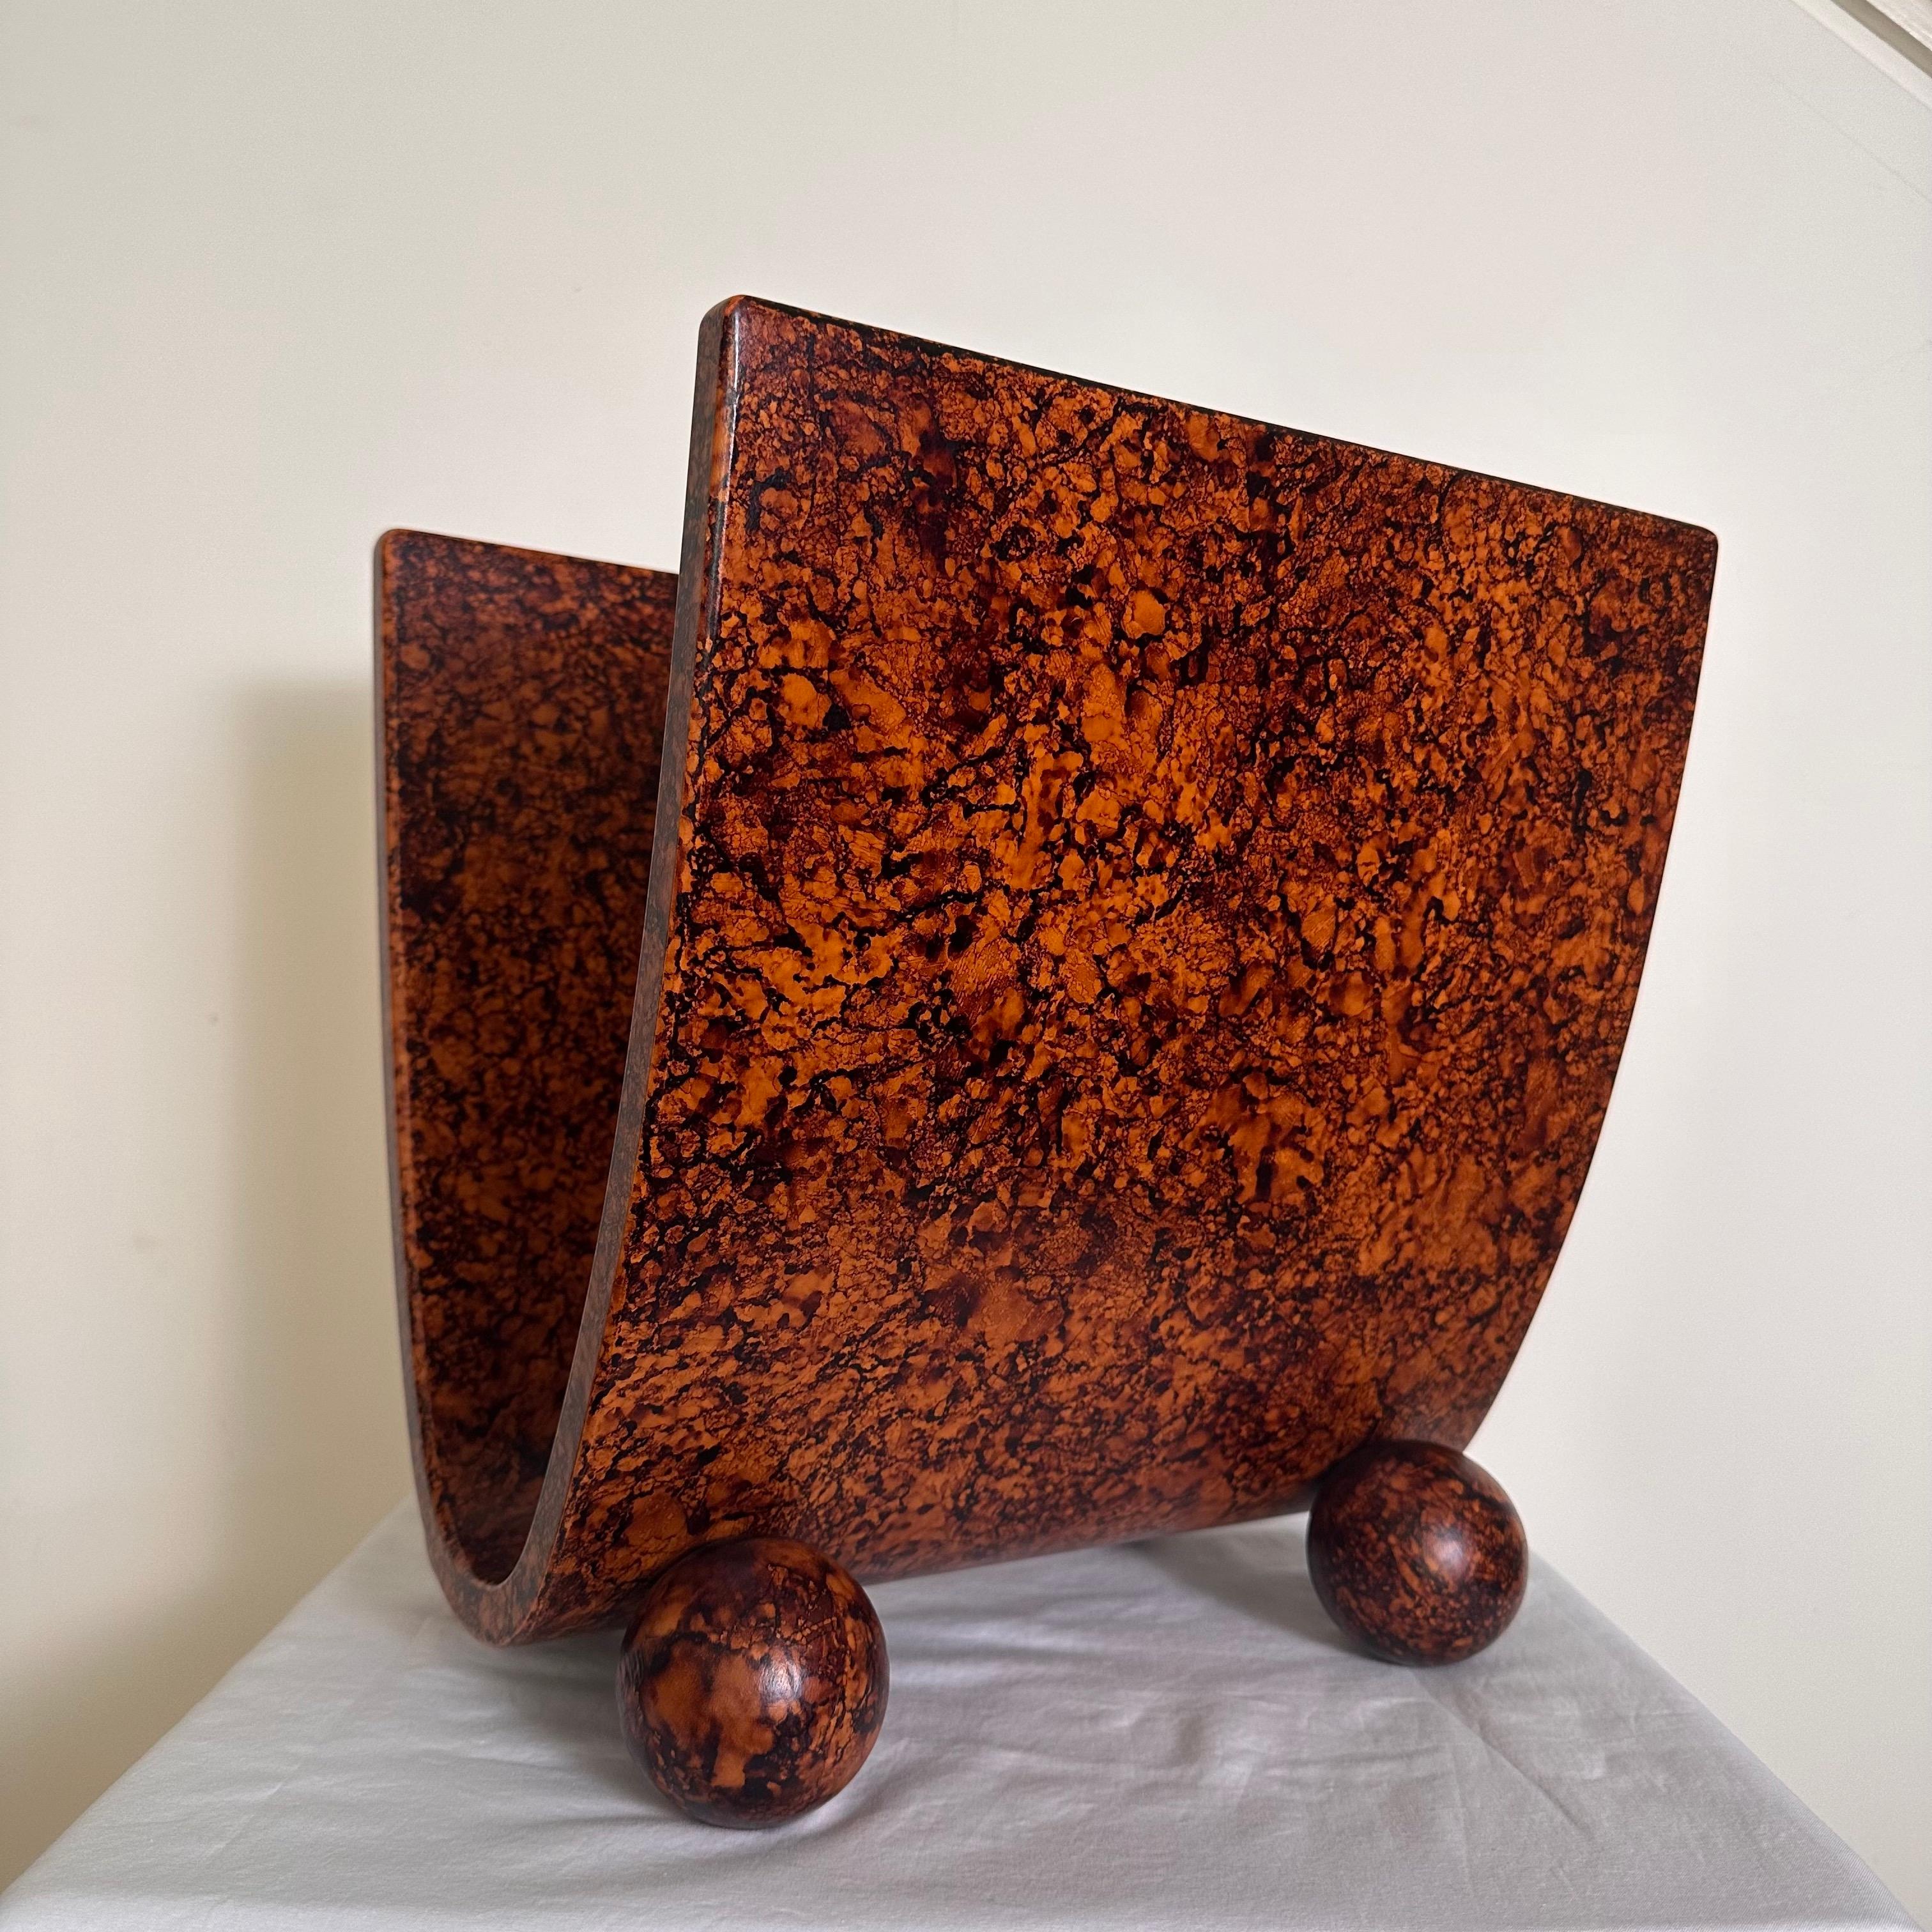 Late 20th Century Vintage Art Deco Post Modern Style Magazine Rack in Faux Burl Wood Stain Finish For Sale